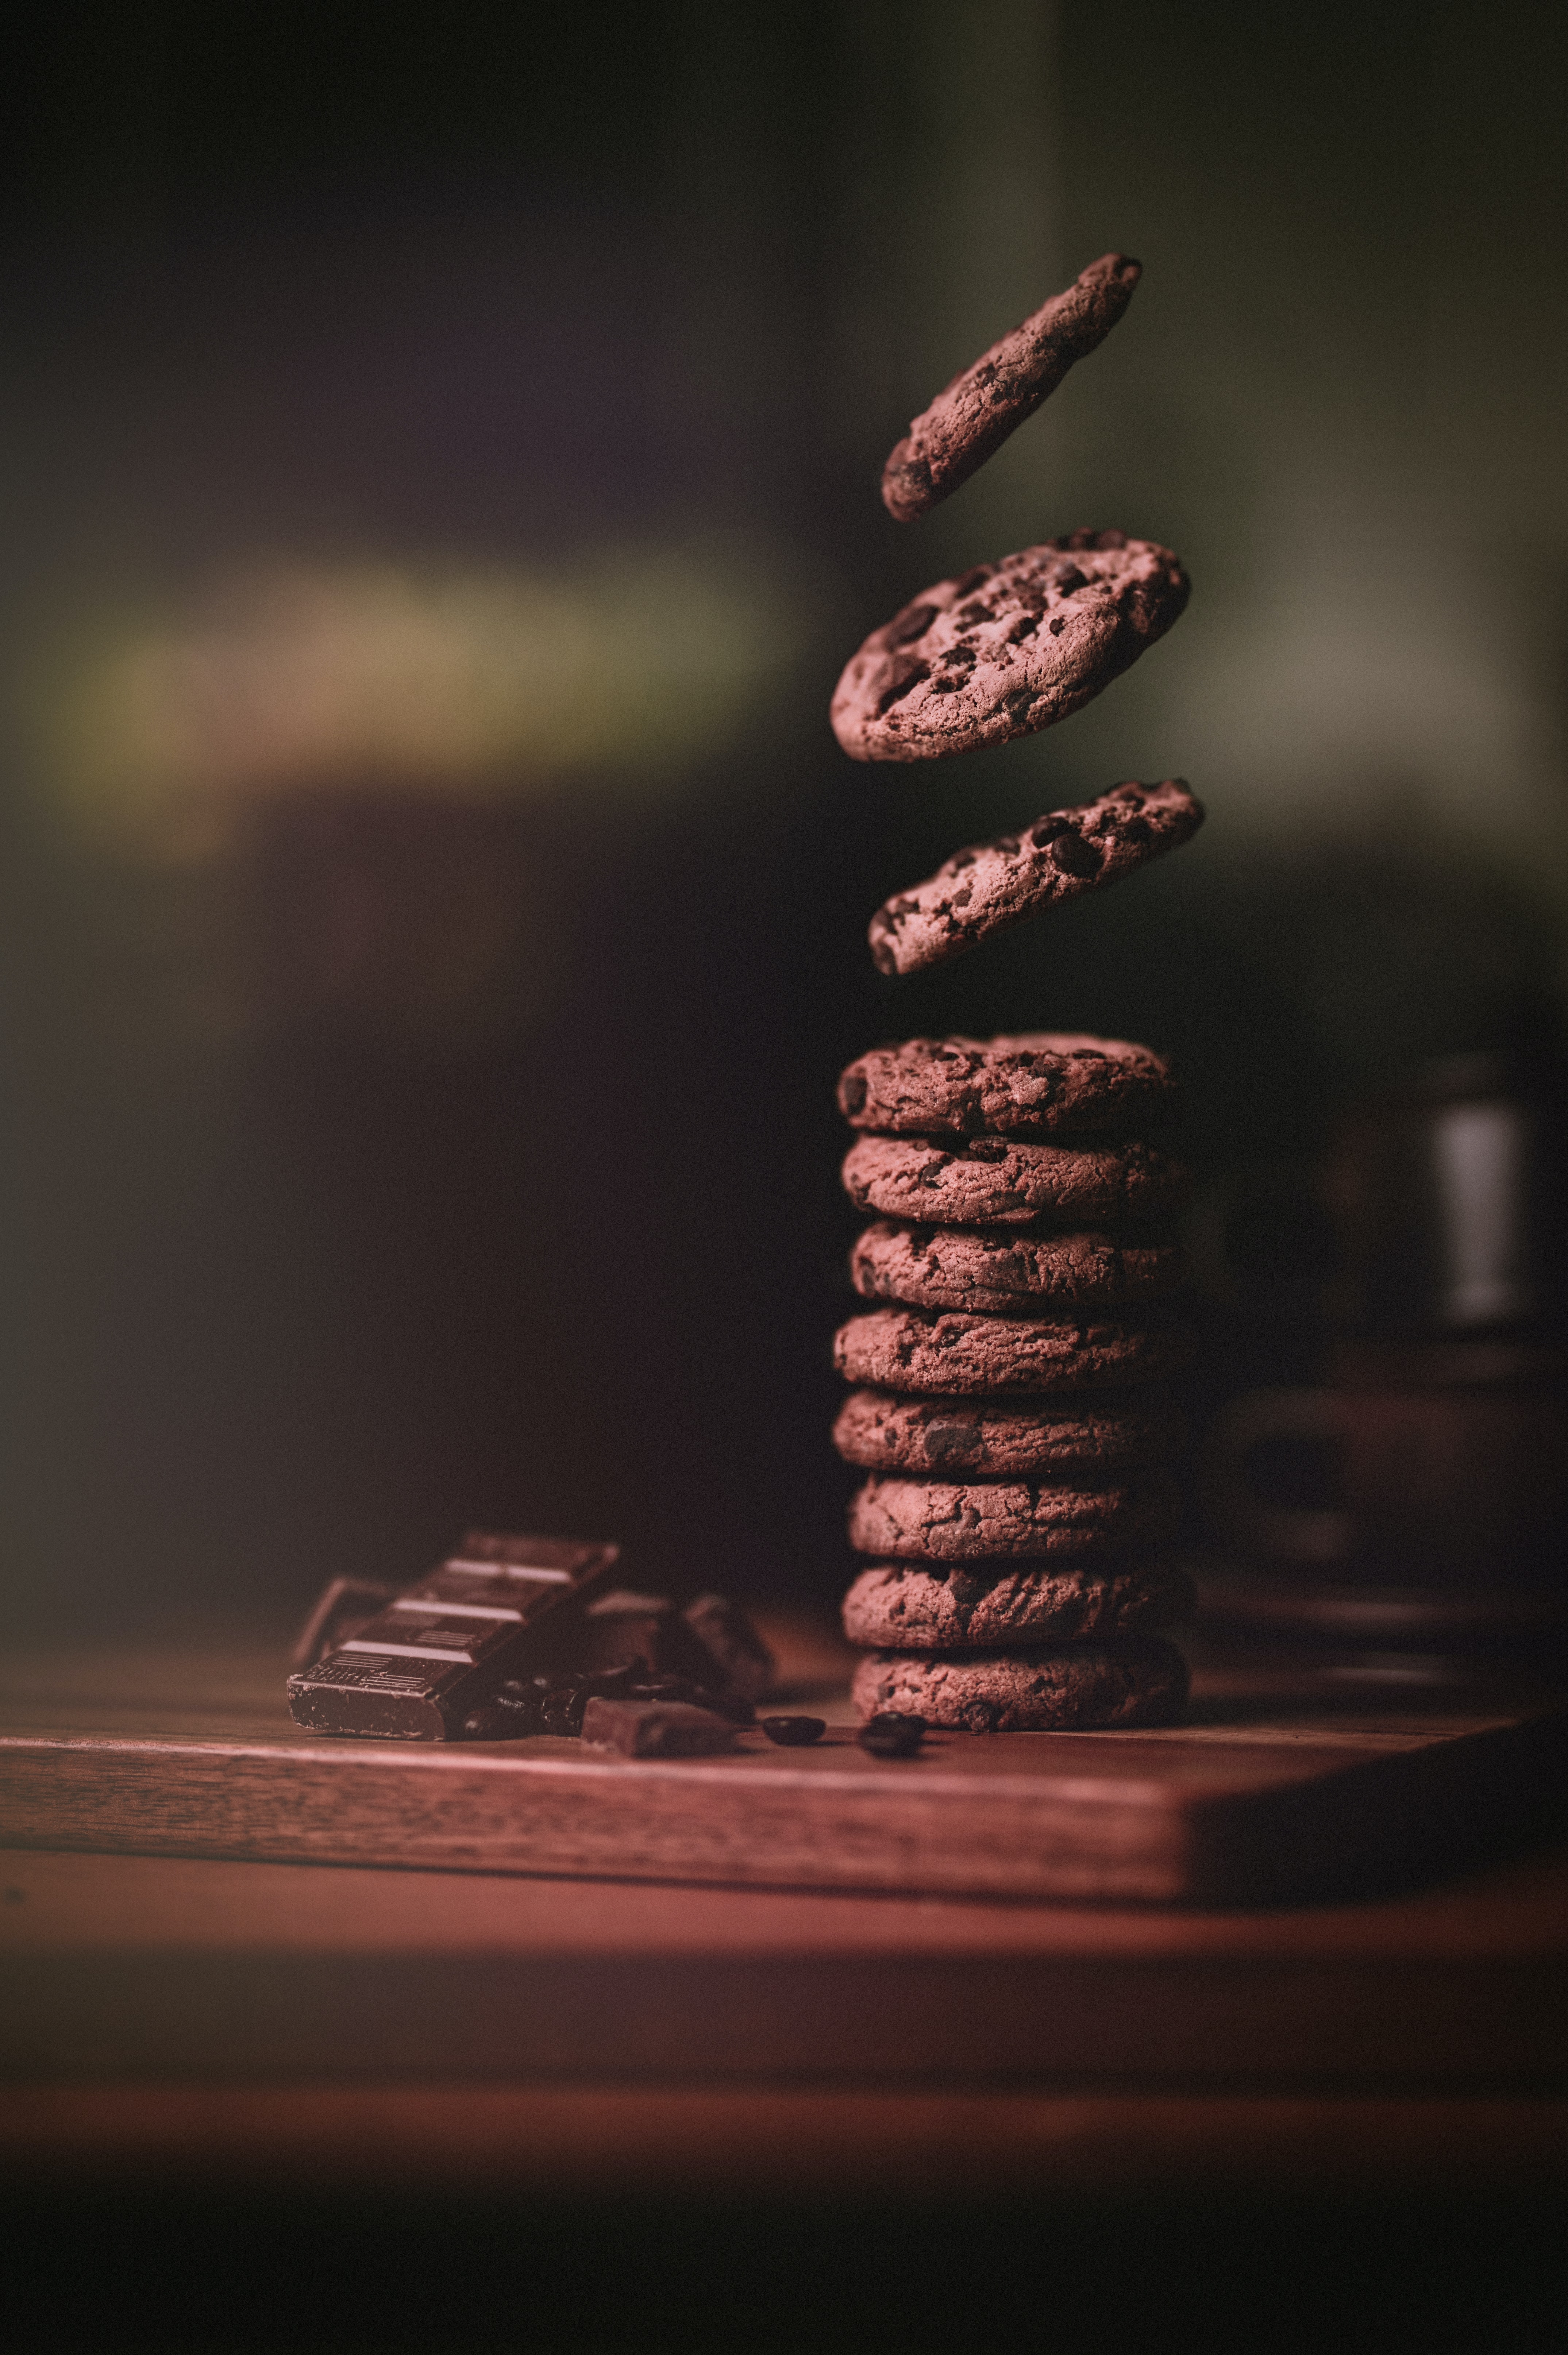 baking, food, chocolate, cookies, bakery products, levitation phone wallpaper